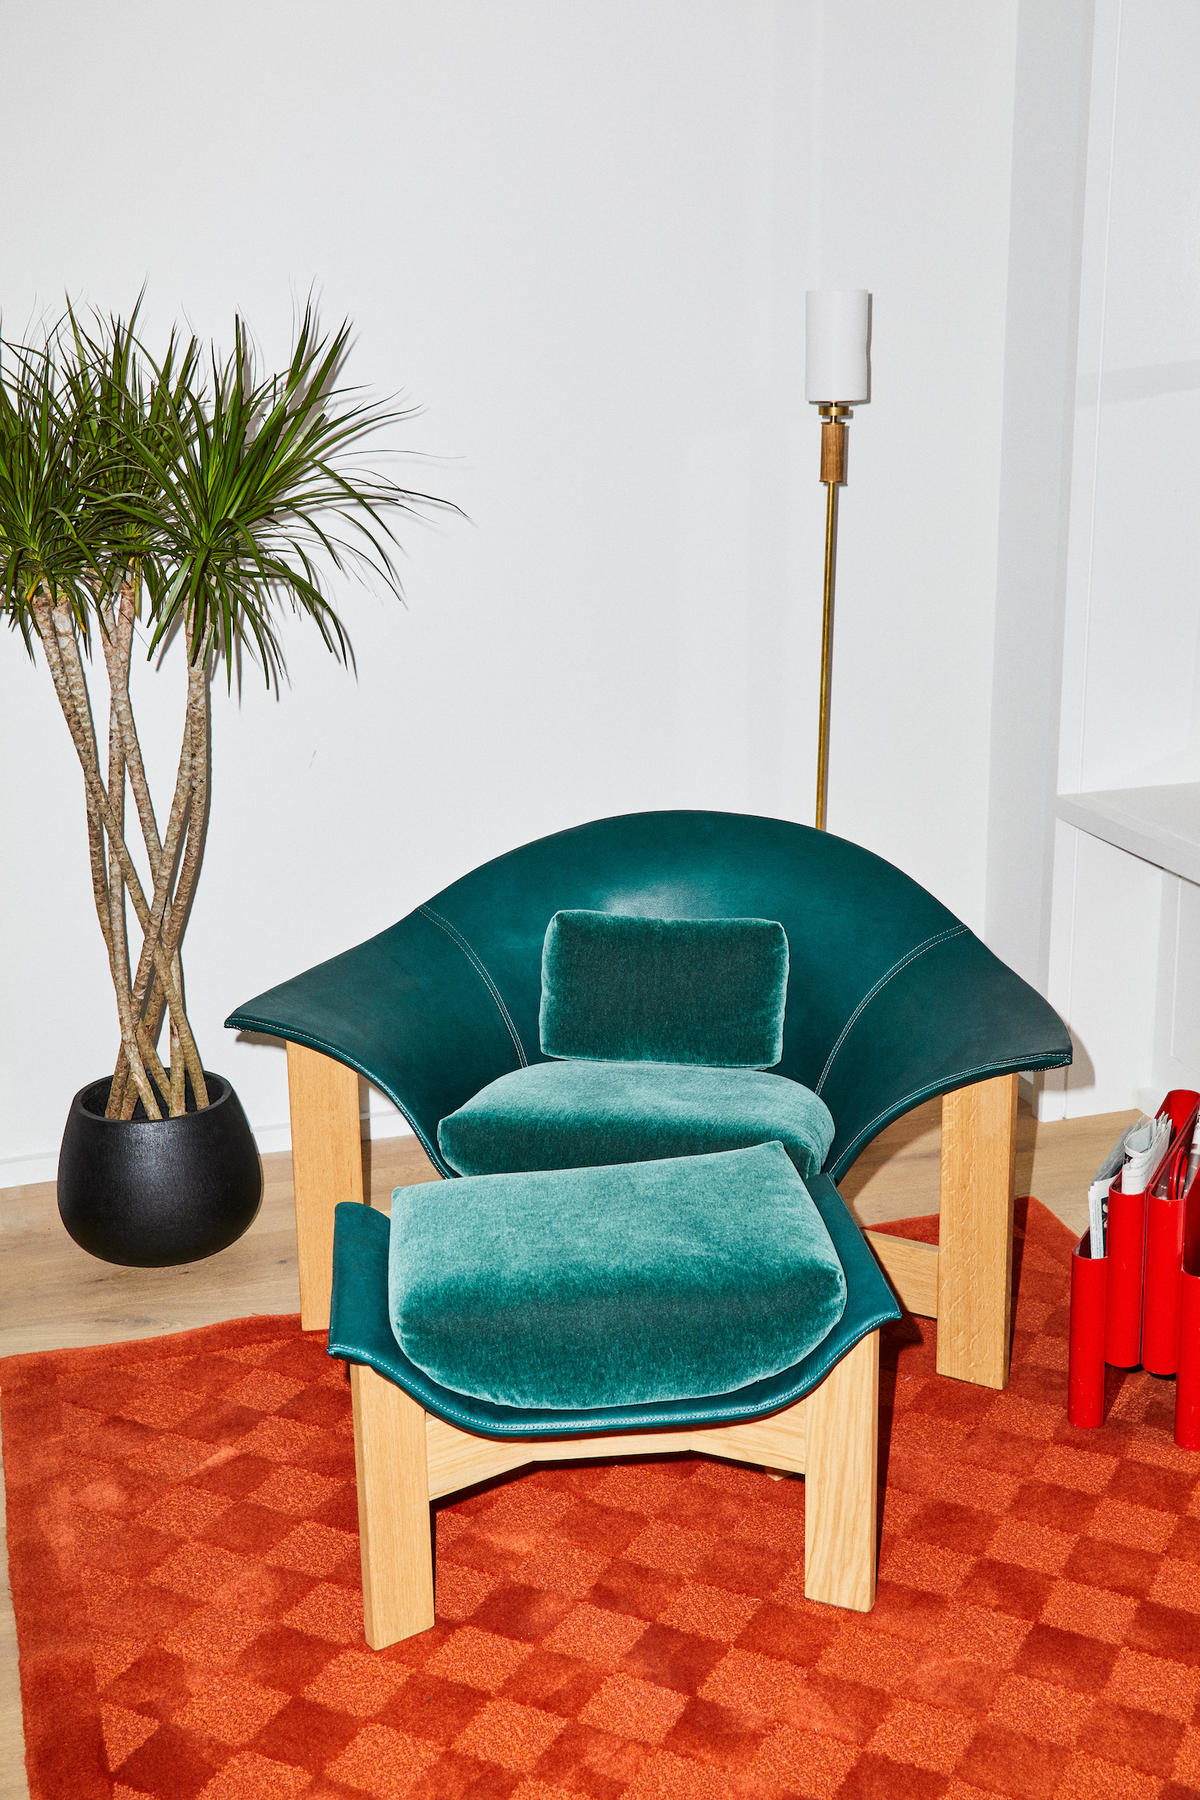 Fresh launches from Lulu LaFortune, Ruggable’s collaboration with Jonathan Adler, and more